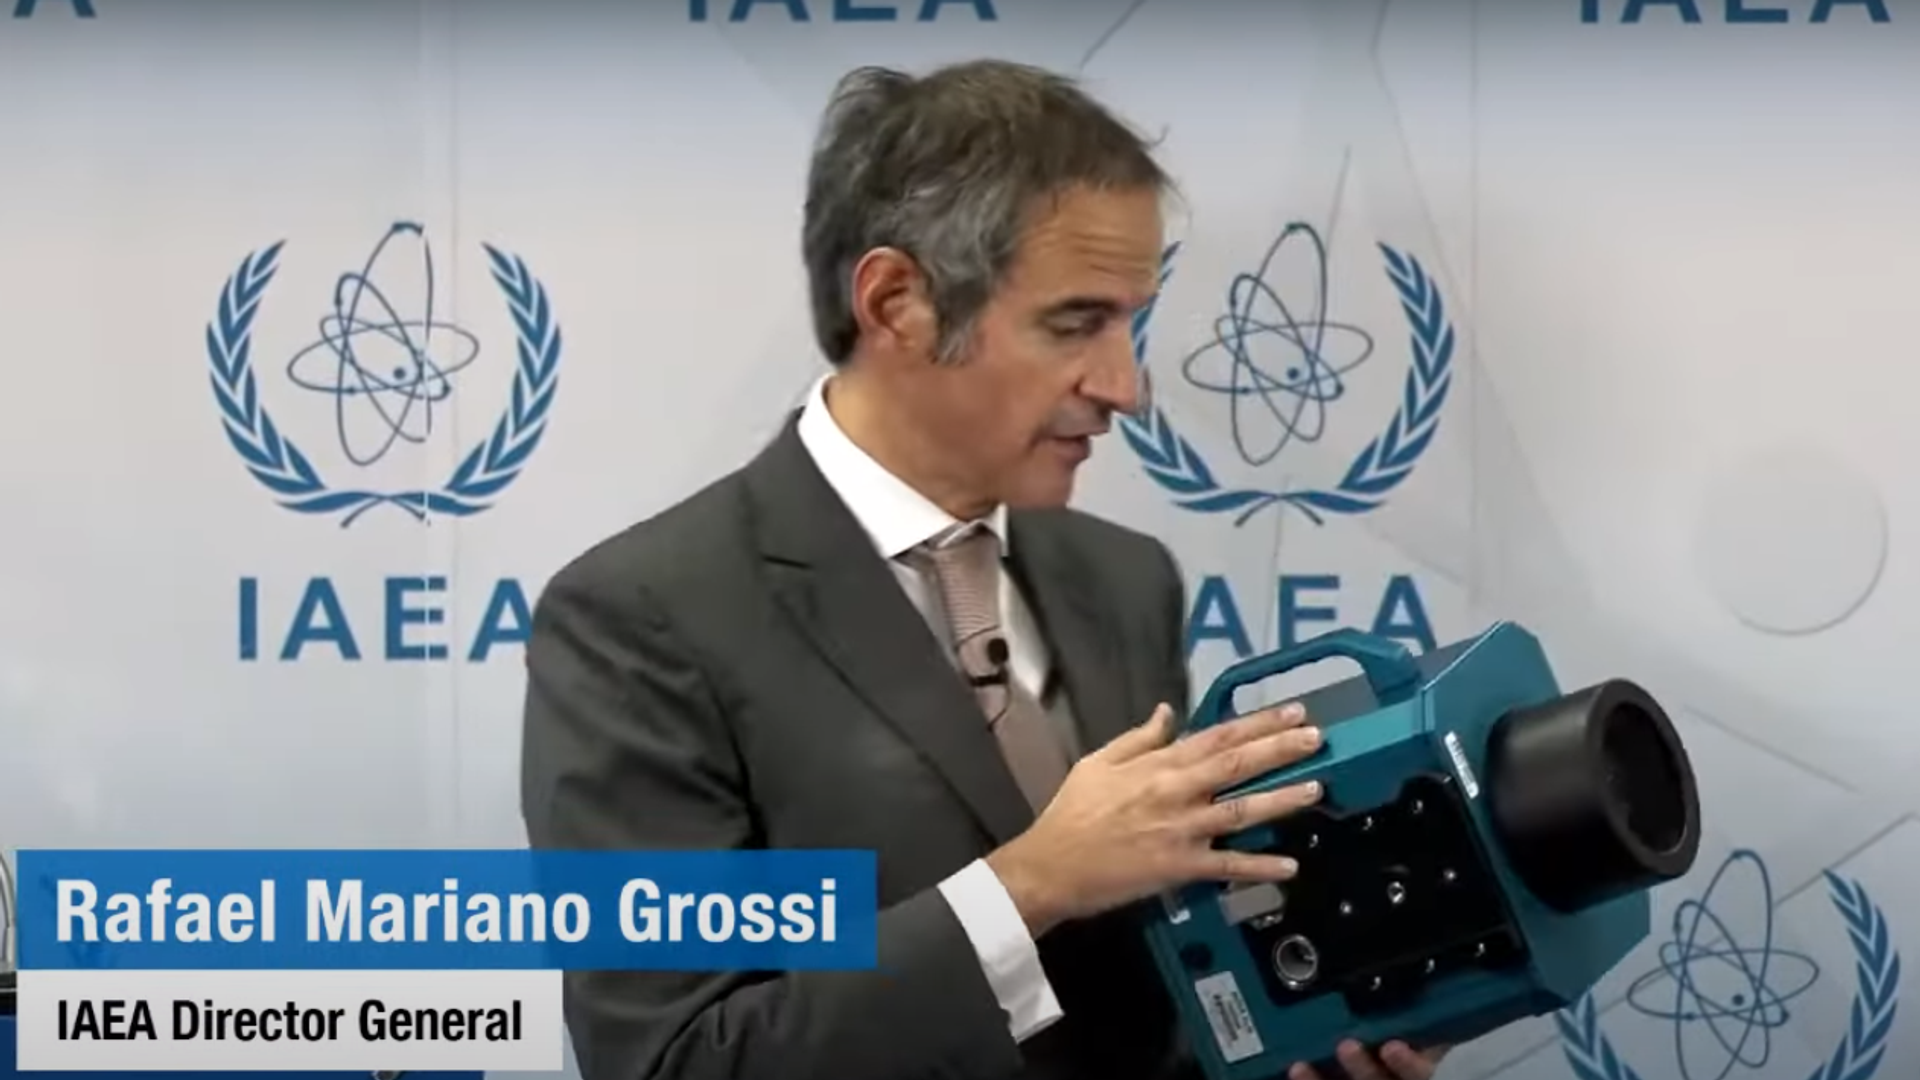 IAEA chief Rafael Grossi holds a press conference, discussing type of cameras used by the nuclear watchdog to monitor Iran's nuclear programme. - Sputnik International, 1920, 03.06.2022